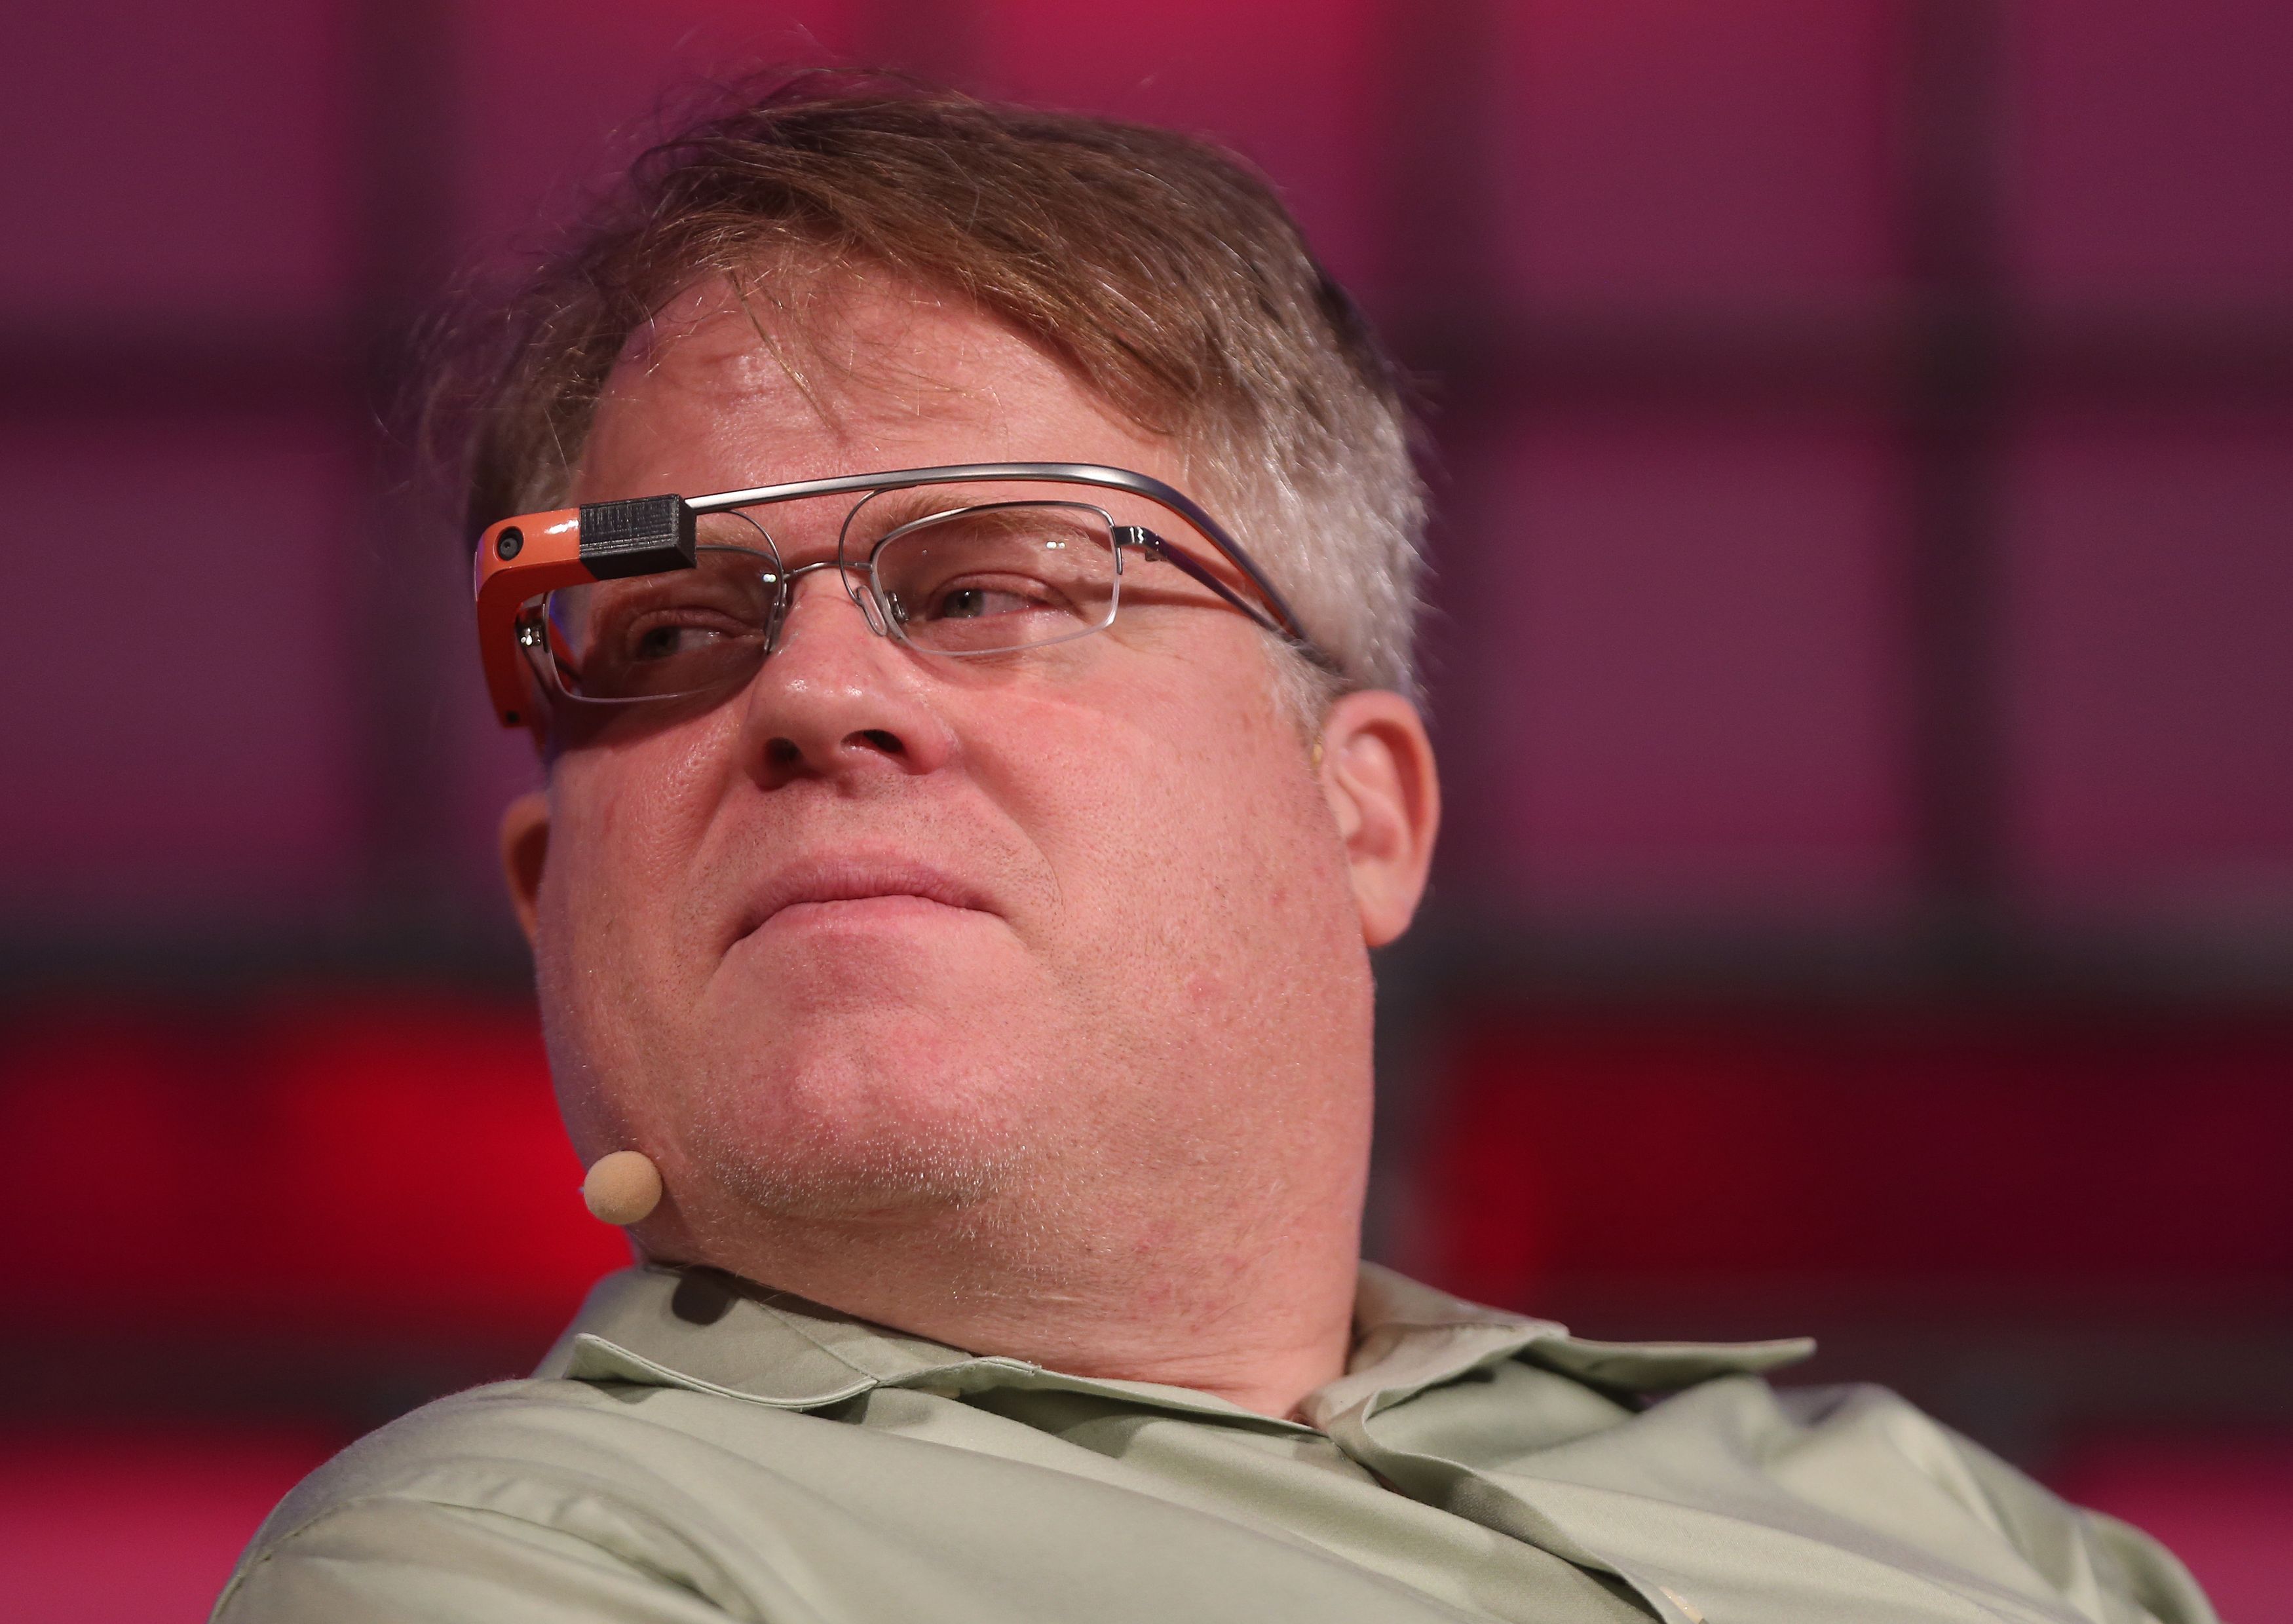 Tech blogger Robert Scoble wears [f500link]Google[/f500link] Glass at the Dublin web summit being held at the RDS in Dublin. (Photo by Niall Carson/PA Images via Getty Images) (Niall Carson - PA Images—PA Images via Getty Images)